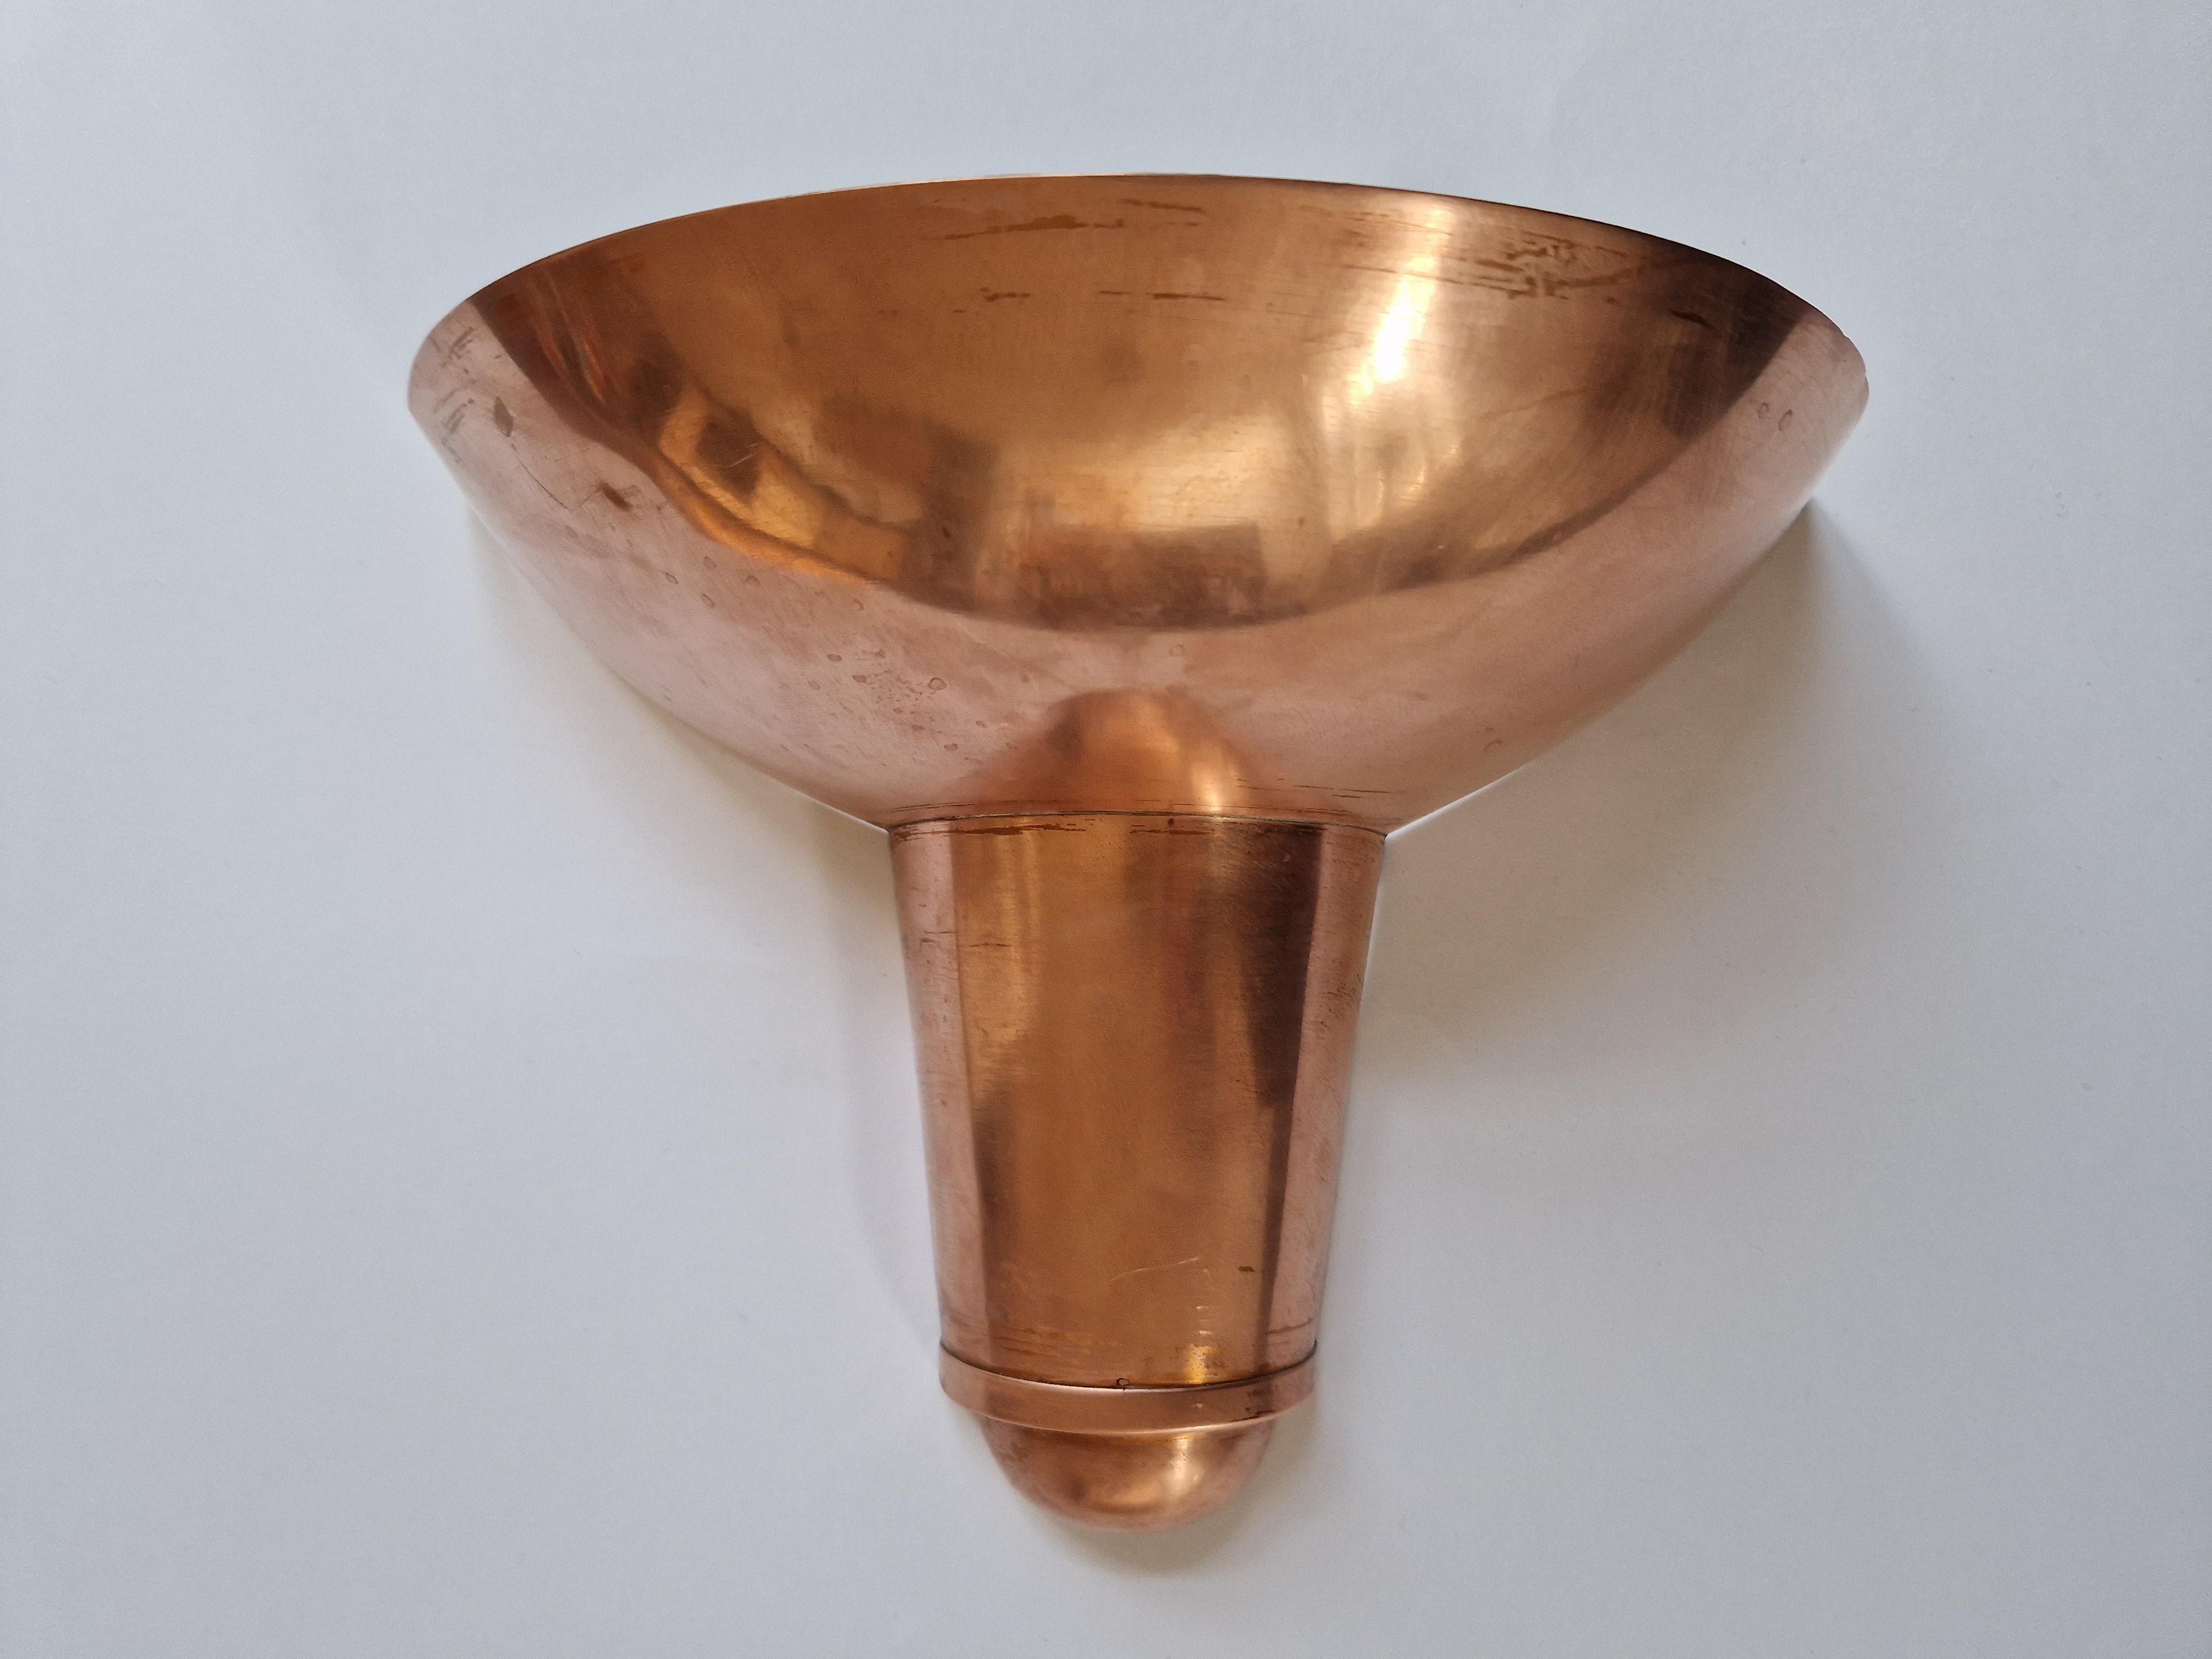 Art deco Brass Wall Lamp, Bauhaus, Functionalism, 1930s In Good Condition For Sale In Praha, CZ